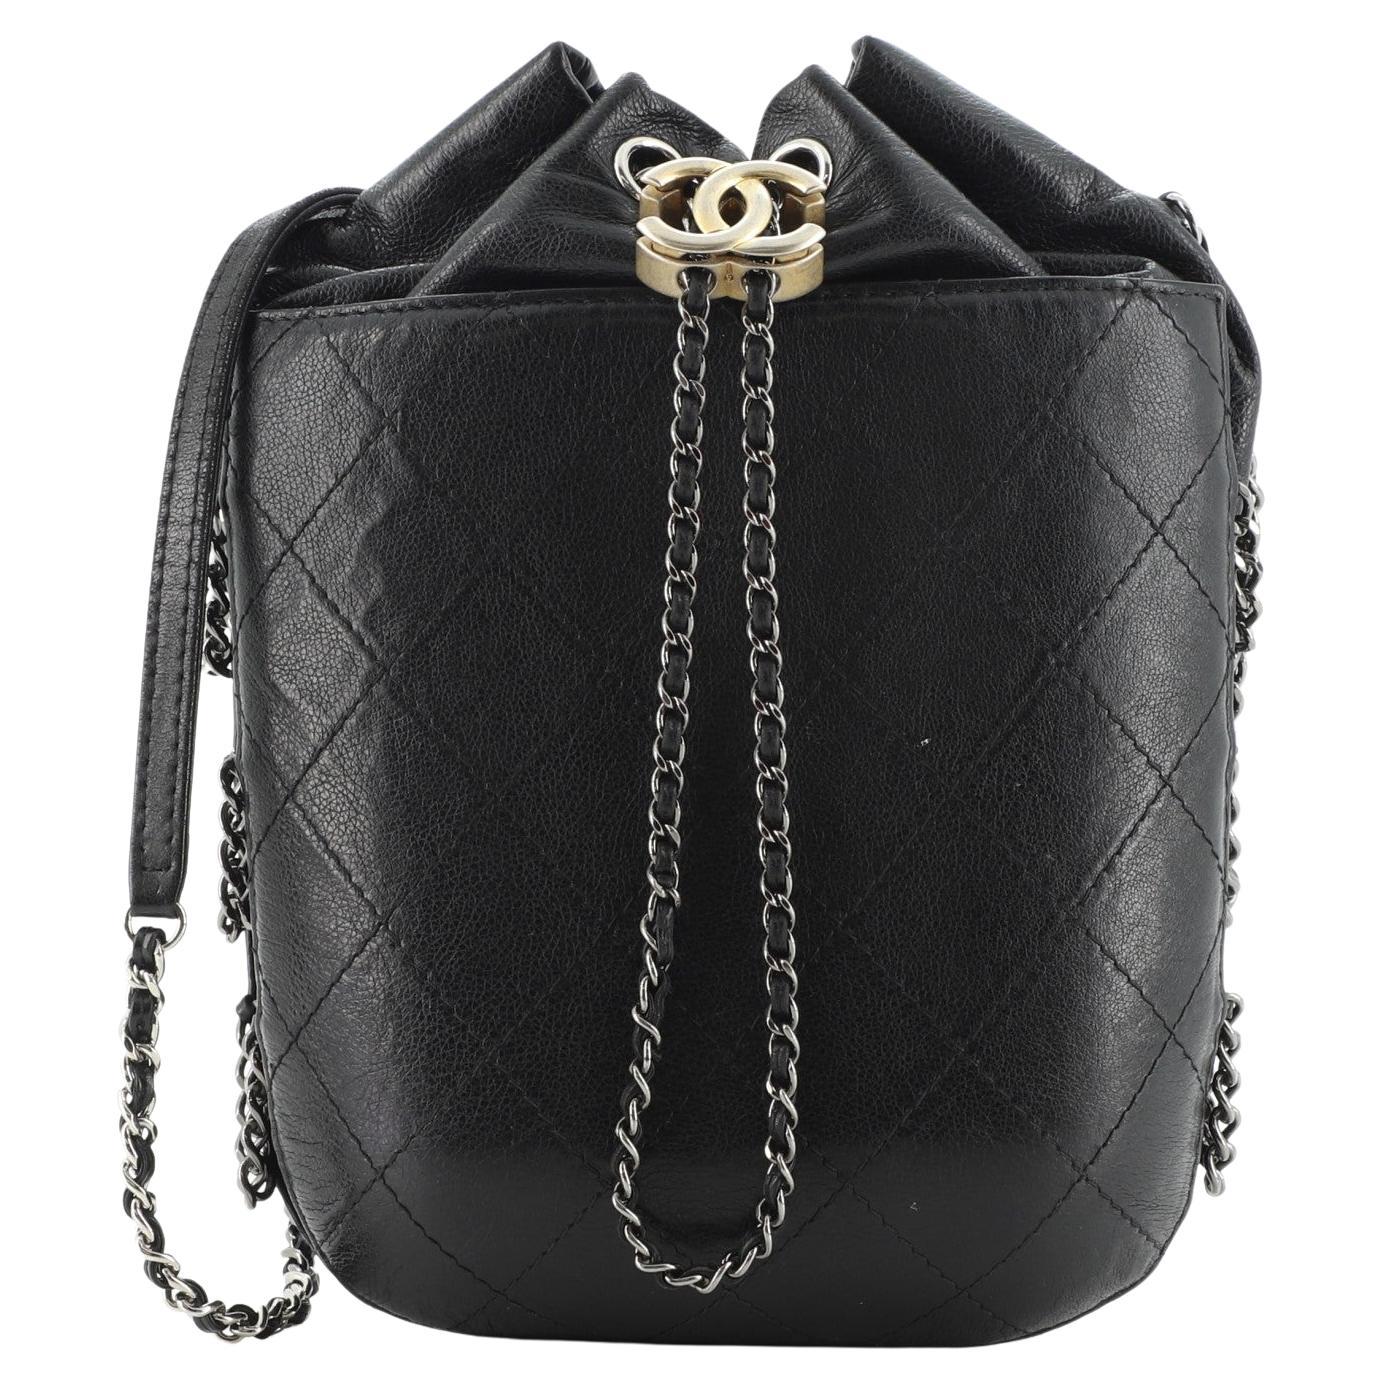 Chanel Gabrielle Bucket Bag - 2 For Sale on 1stDibs  chanel small gabrielle  bucket bag, gabrielle bucket bag chanel, chanel drawstring bag